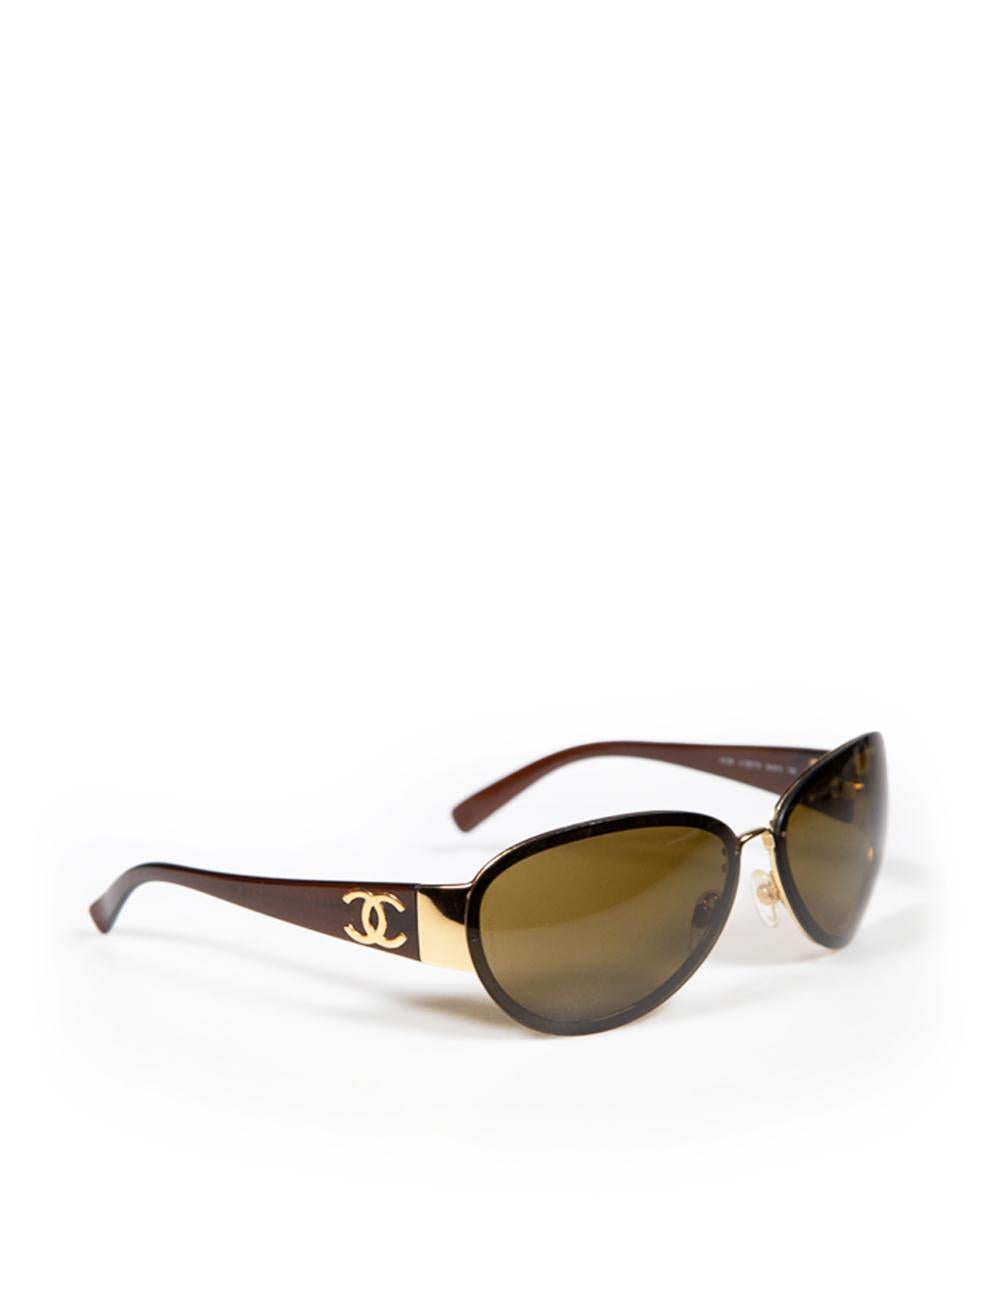 CONDITION is Very good. Minimal wear to sunglasses is evident. Minimal wear to lenses with some minor scratches to the lens, there is some slight tarnishing around the metal screws on this used Chanel designer resale item.
 
 
 
 Details
 
 
 Brown
